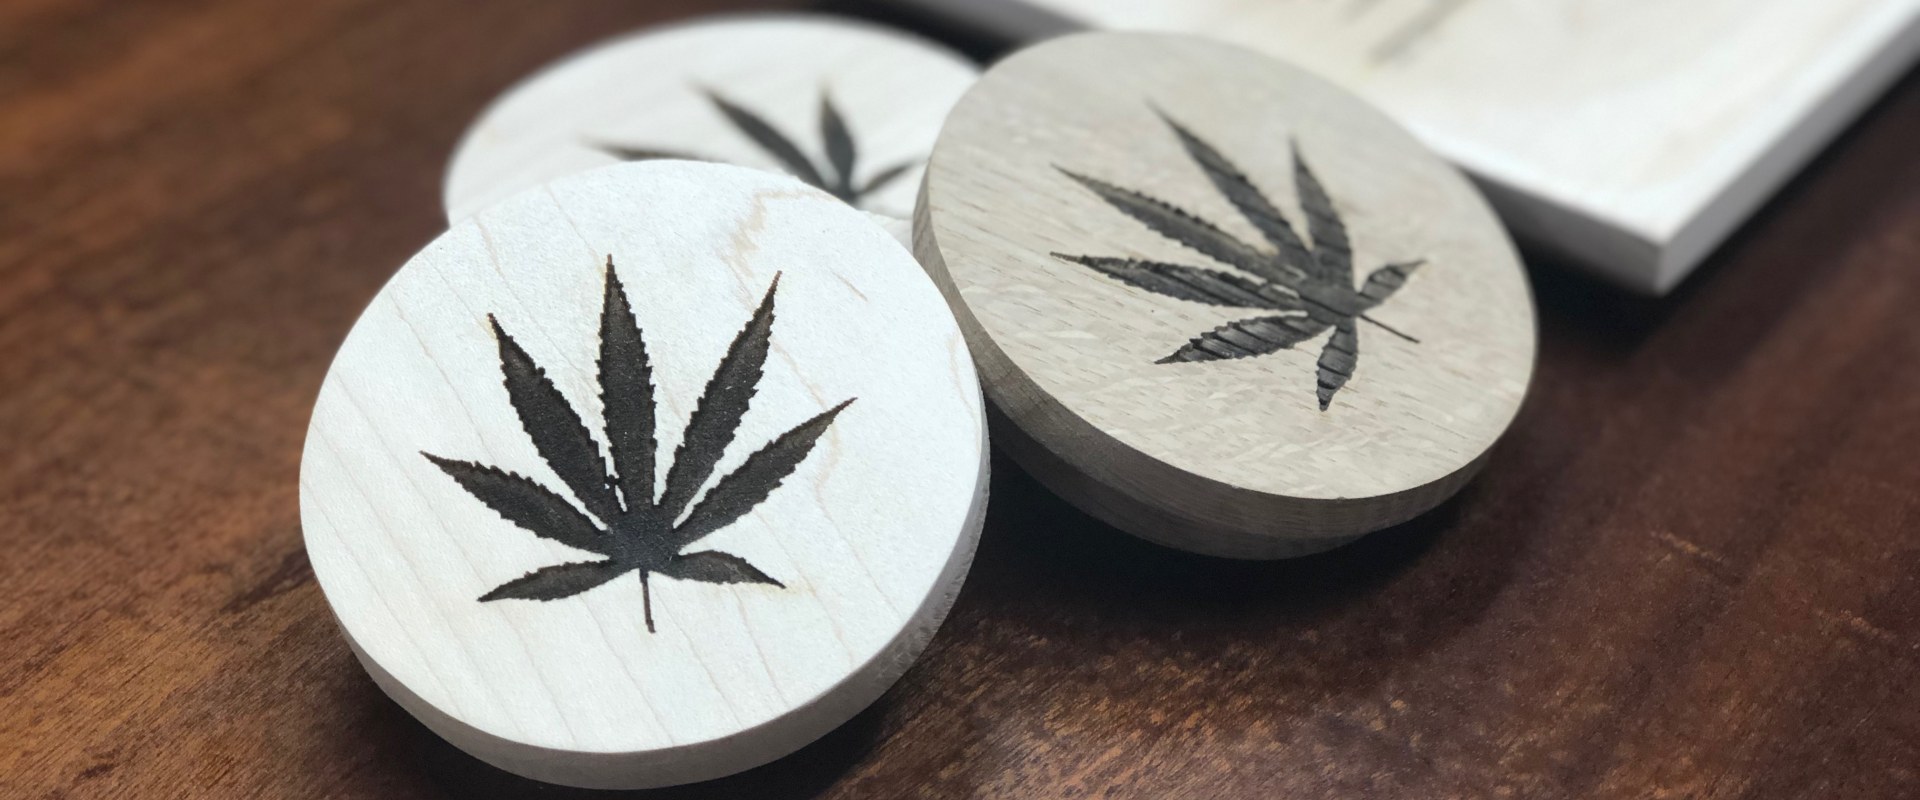 Can cannabis accessories be visible from outside the store?